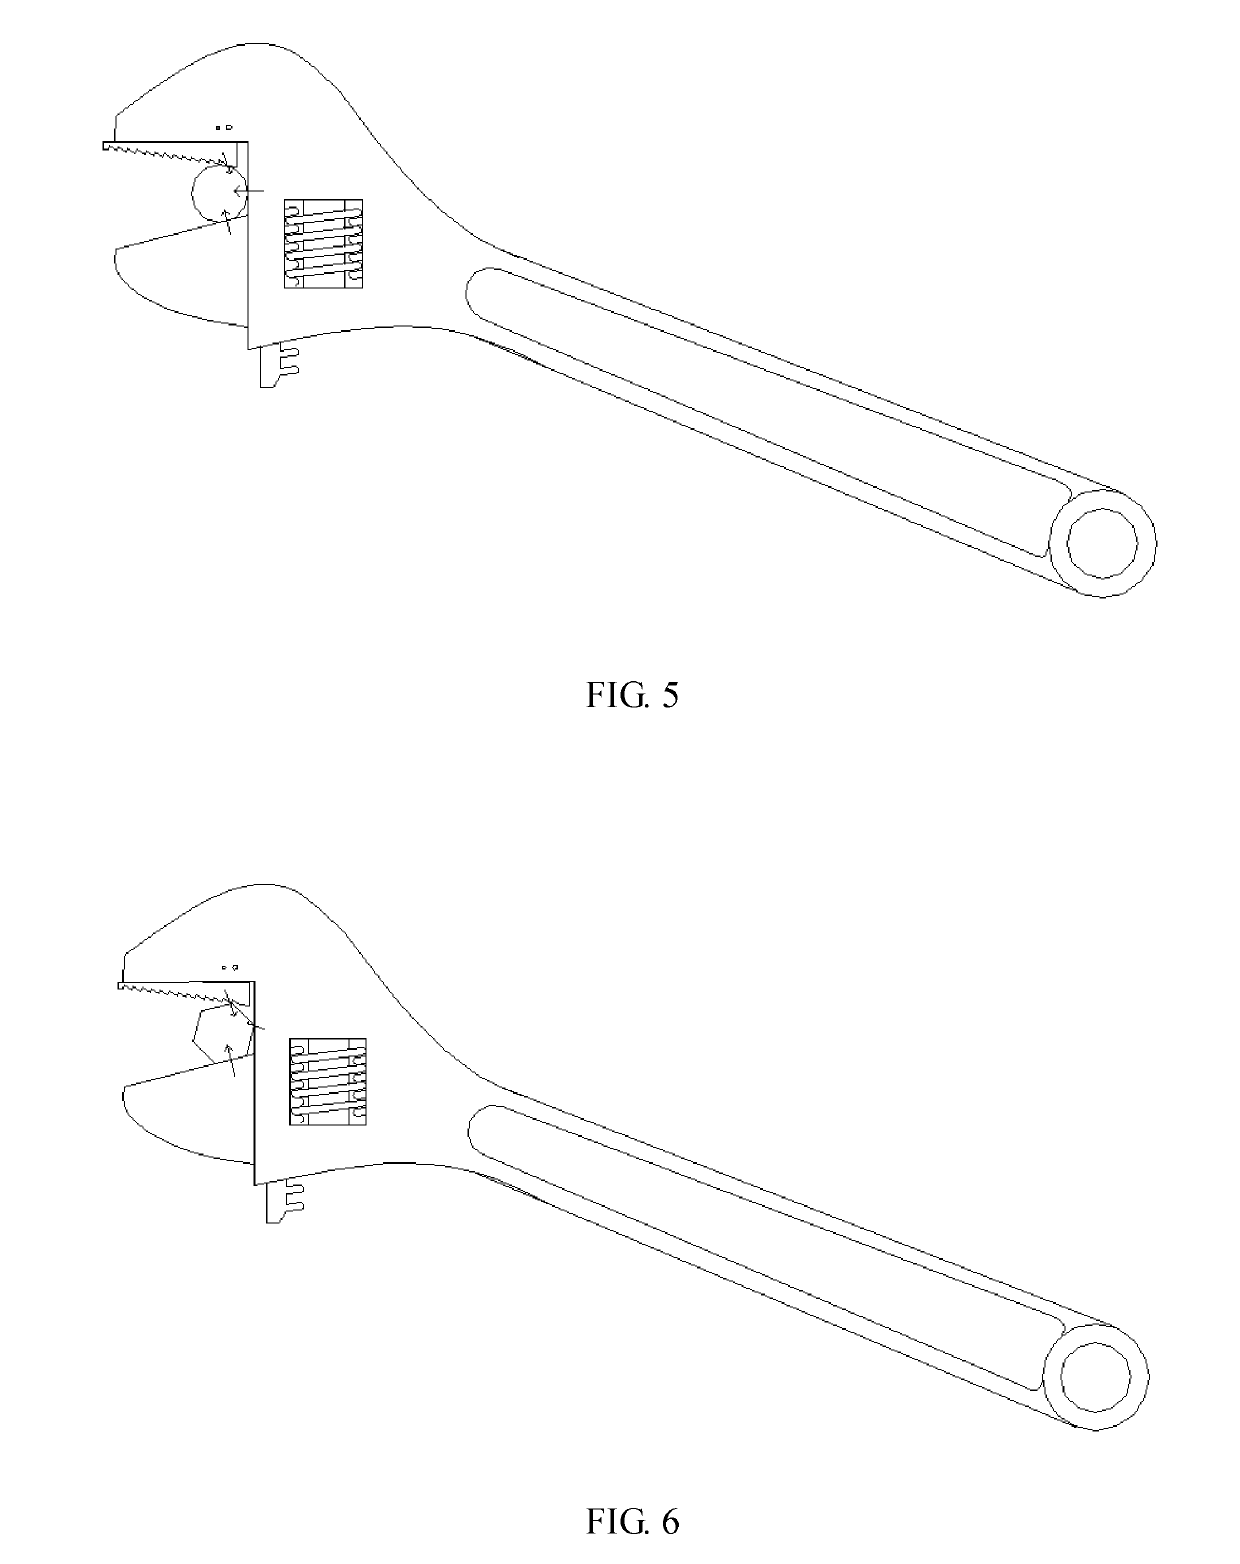 V-shaped bionic wrench